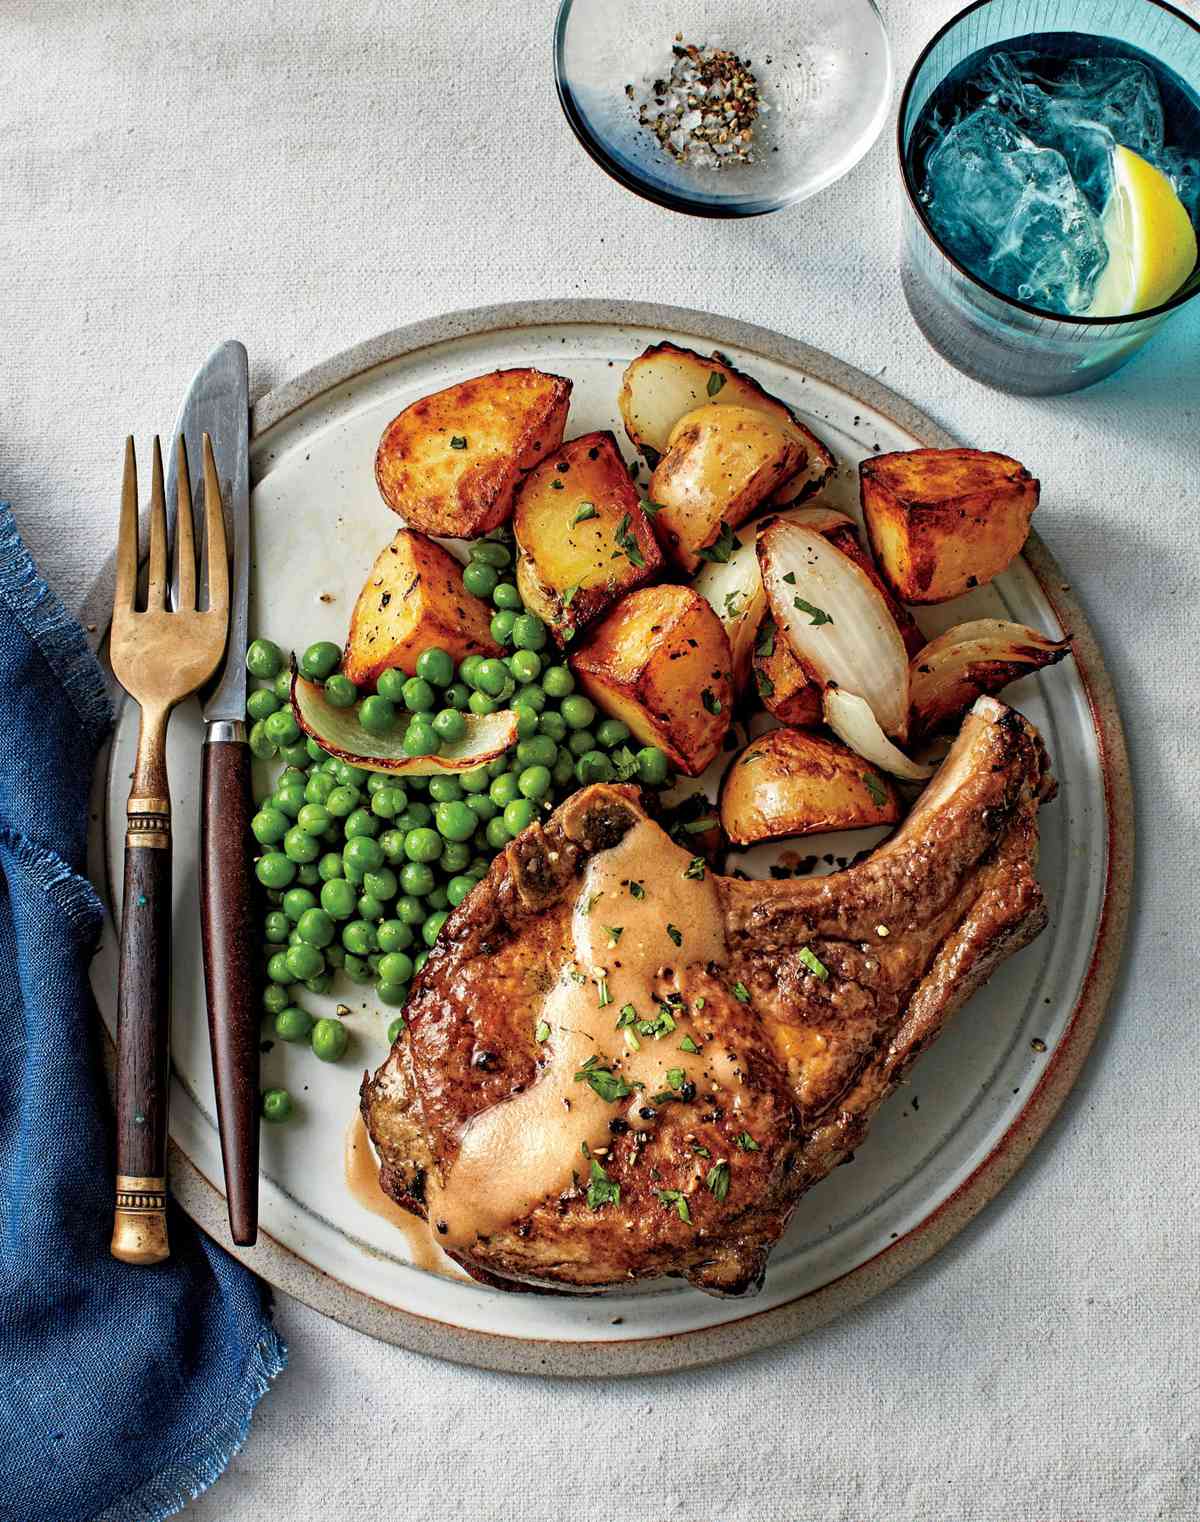 Simple Suppers Challenge: Fried Pork Chops with Peas and Potatoes